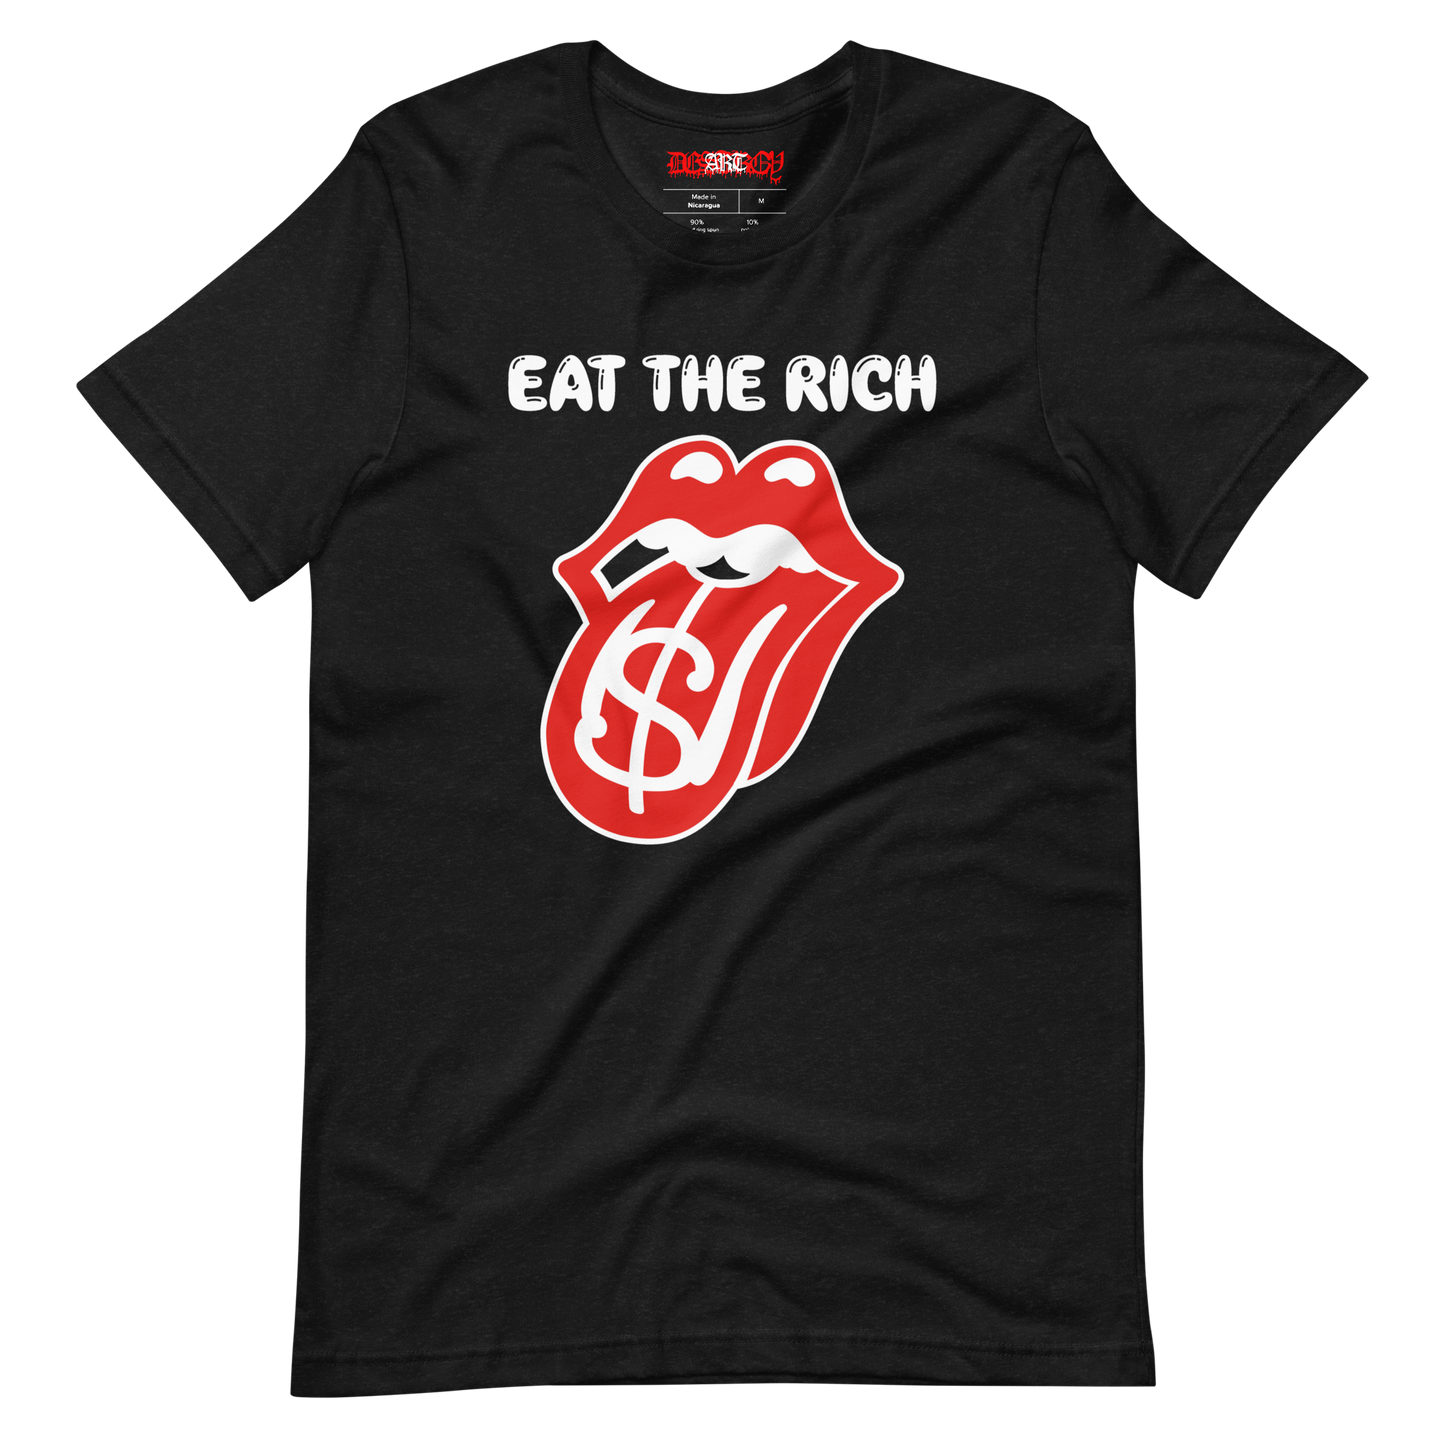 Stealworks "Eat The Rich" T-shirt